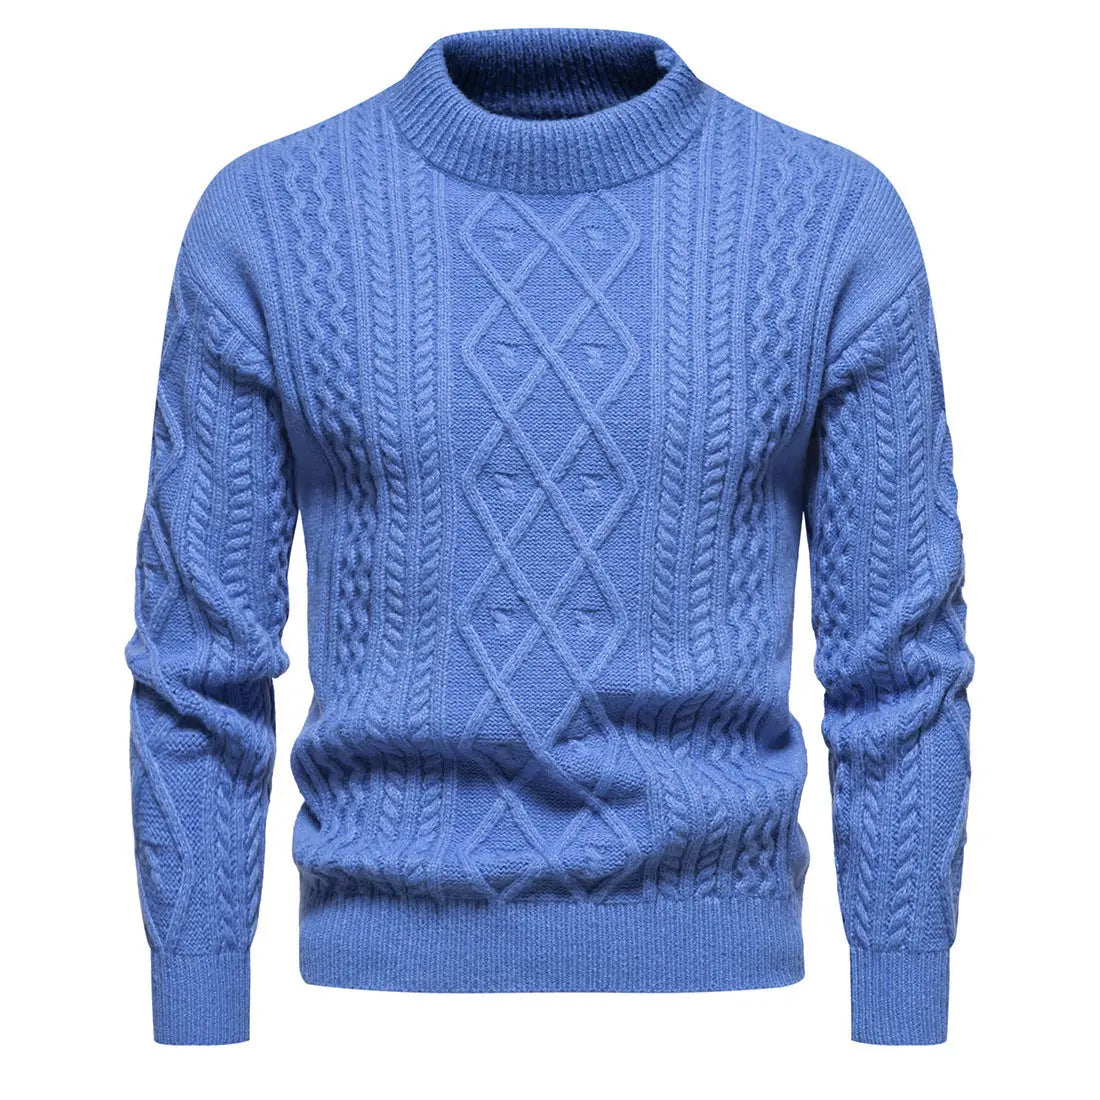 Men's Solid Color Round Neck Sweater Bottoming Shirt - Image #1